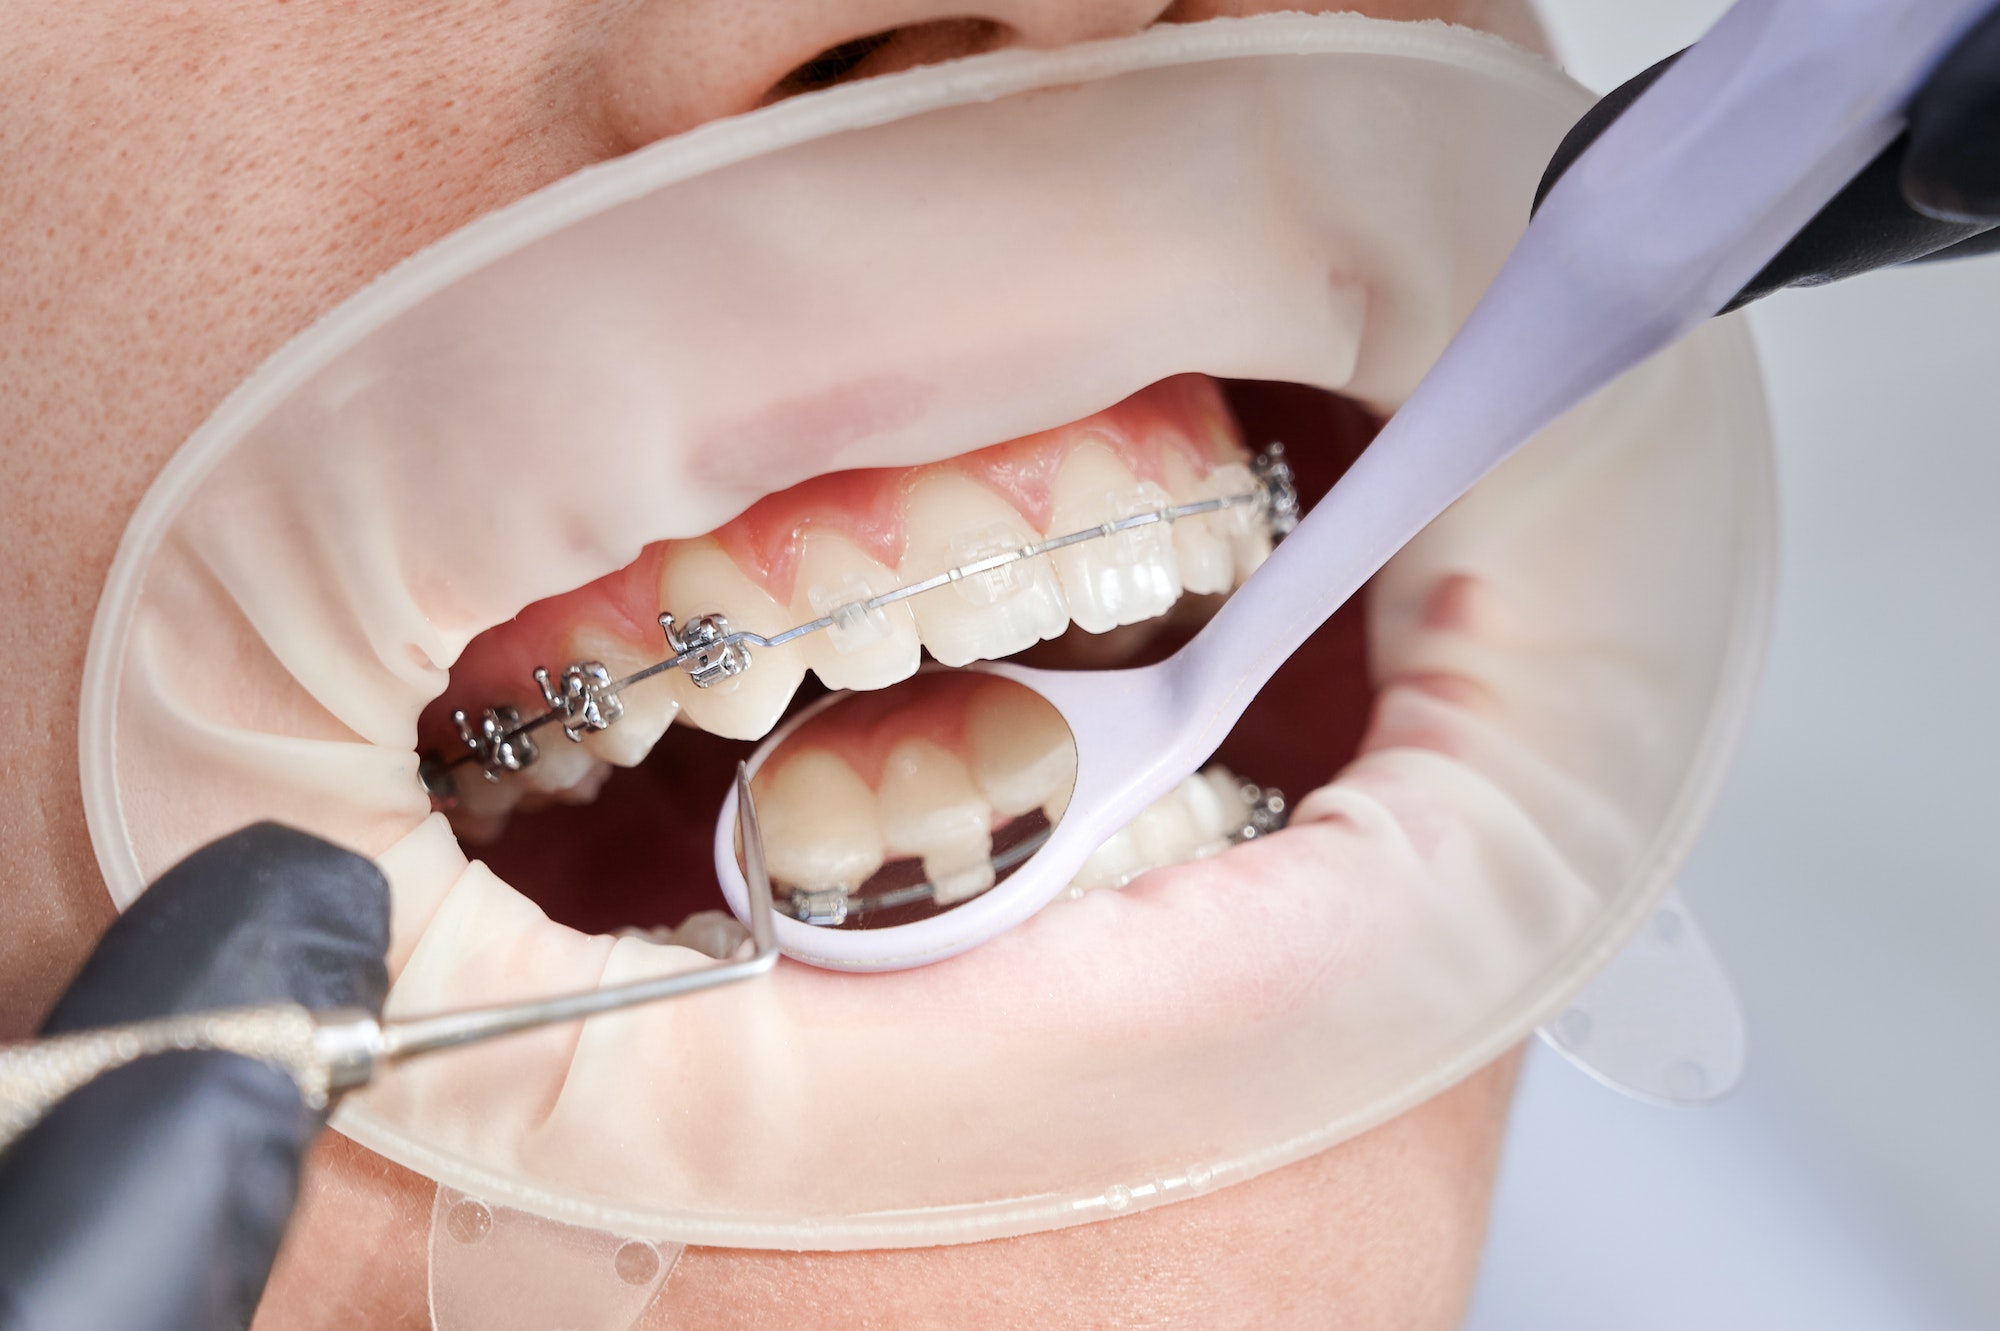 Dentist attaching metal braces to patient teeth.